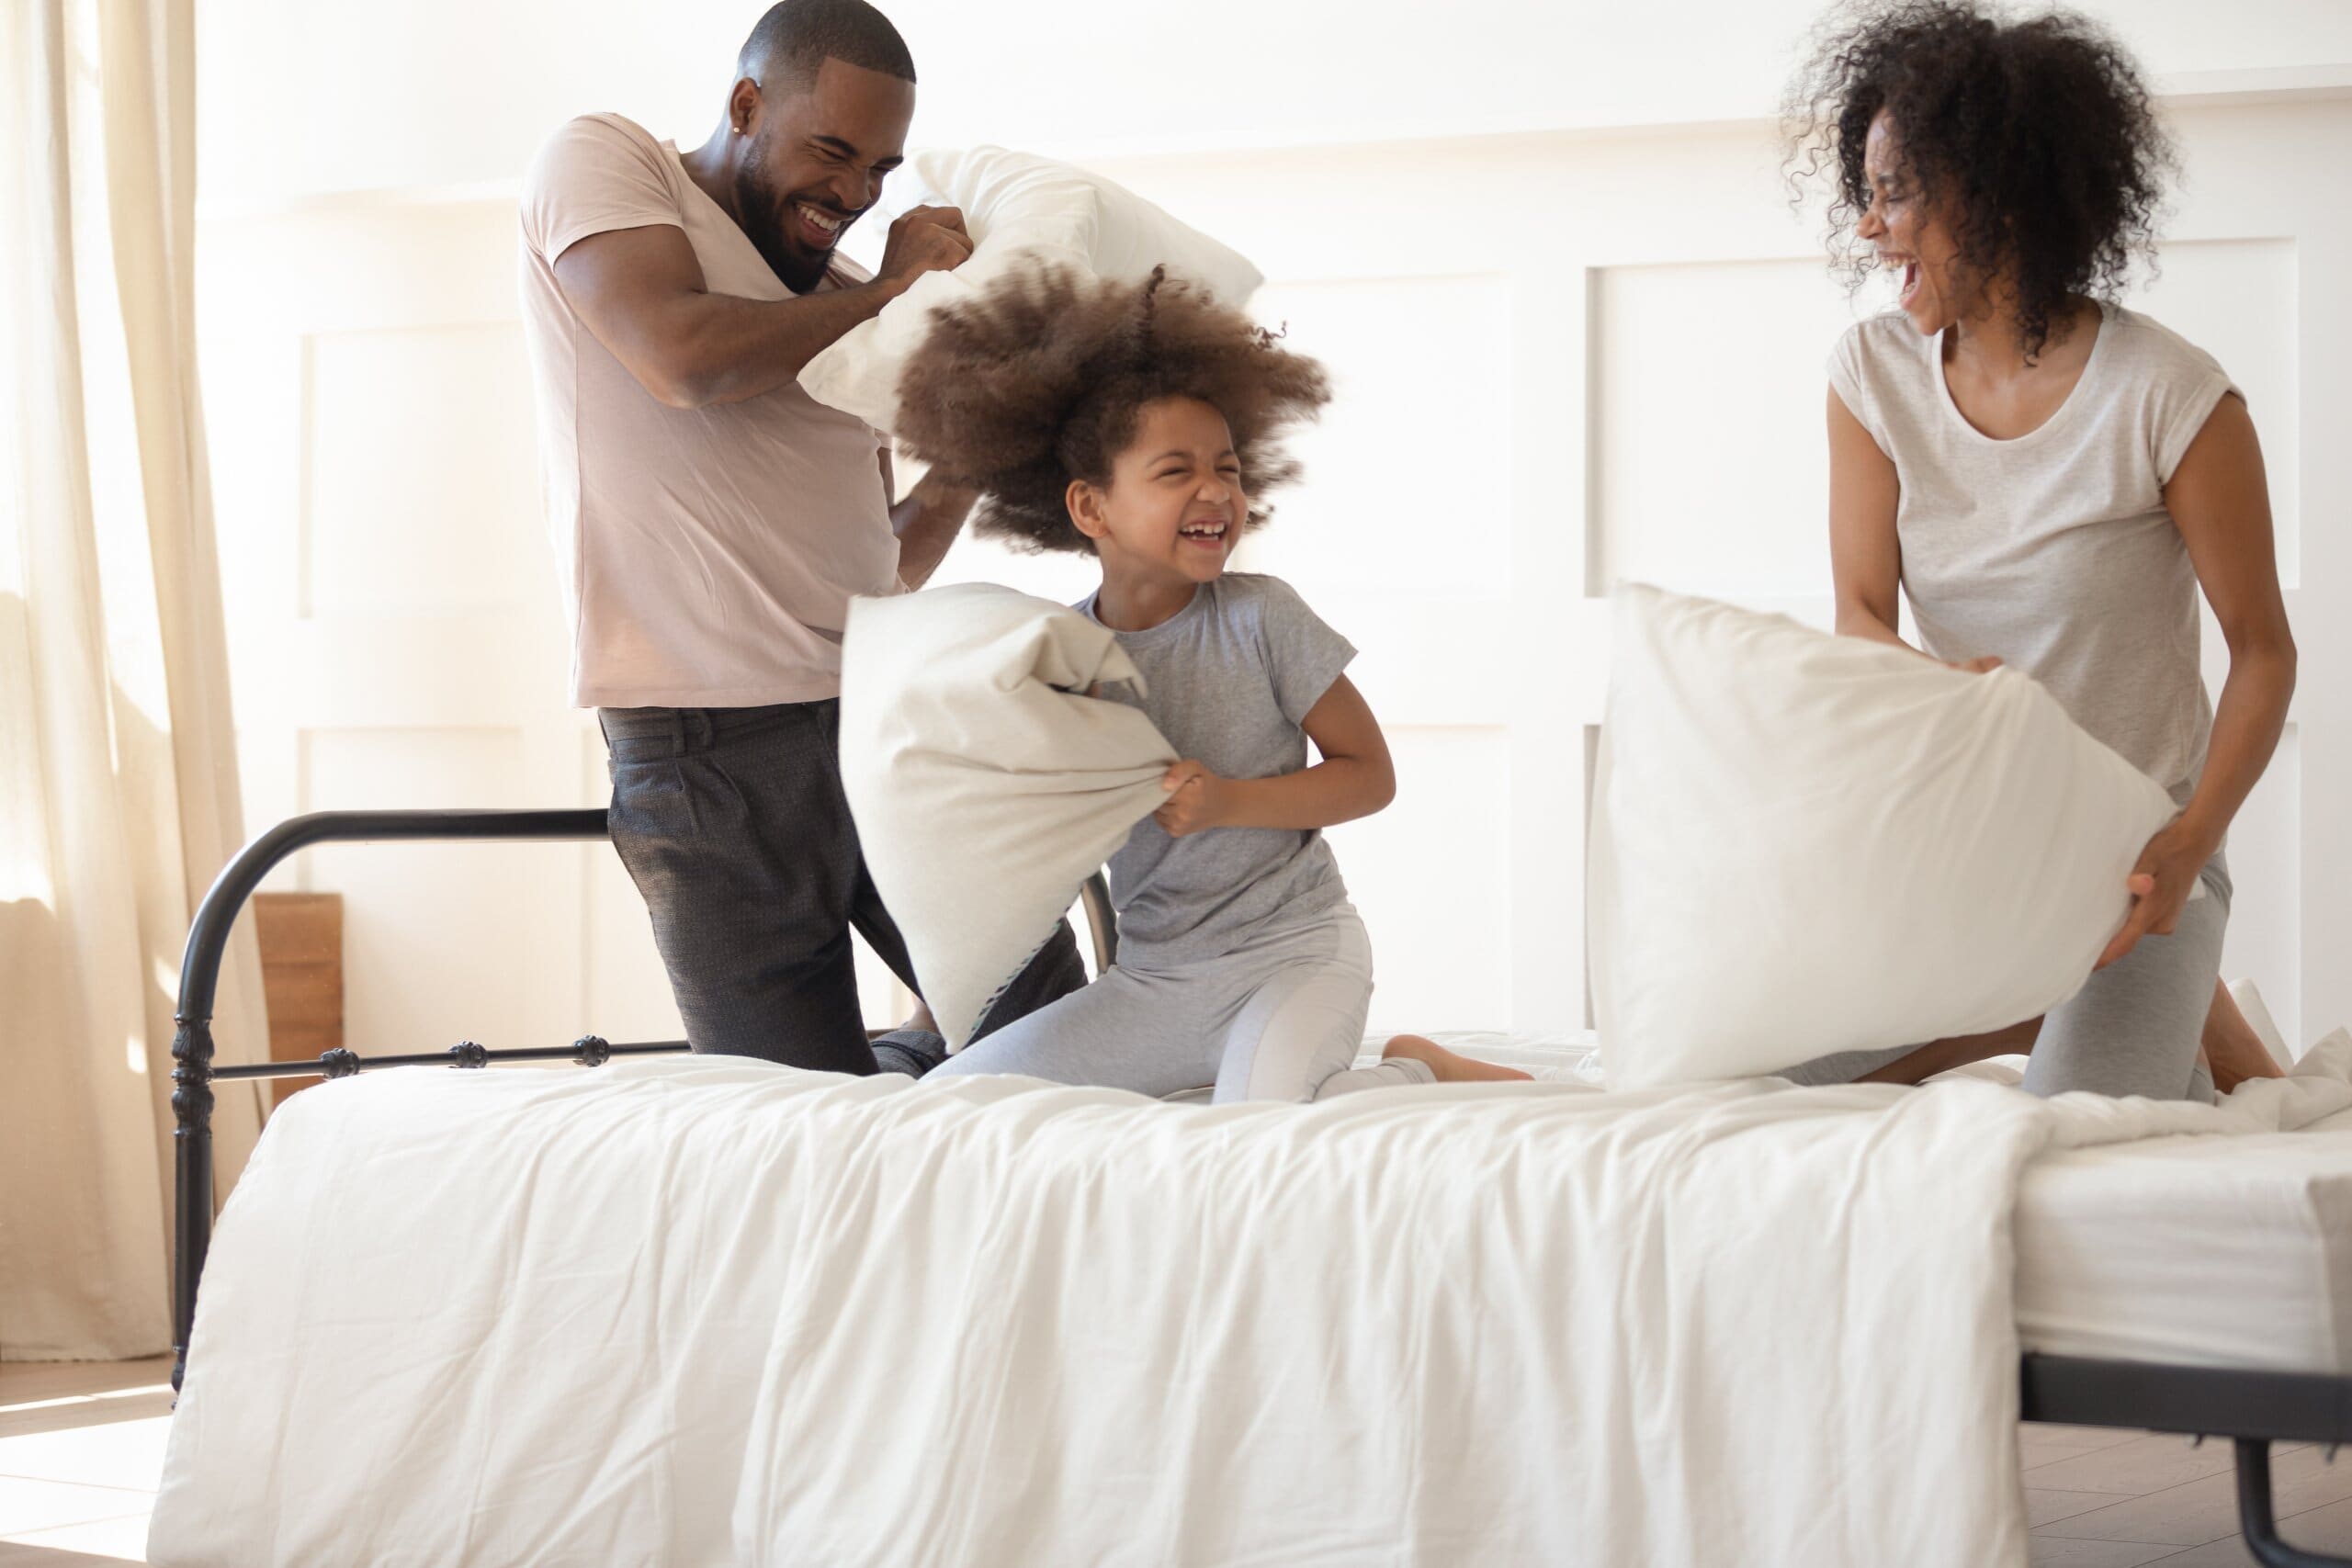 Happy family having a pillow fight on a bed.